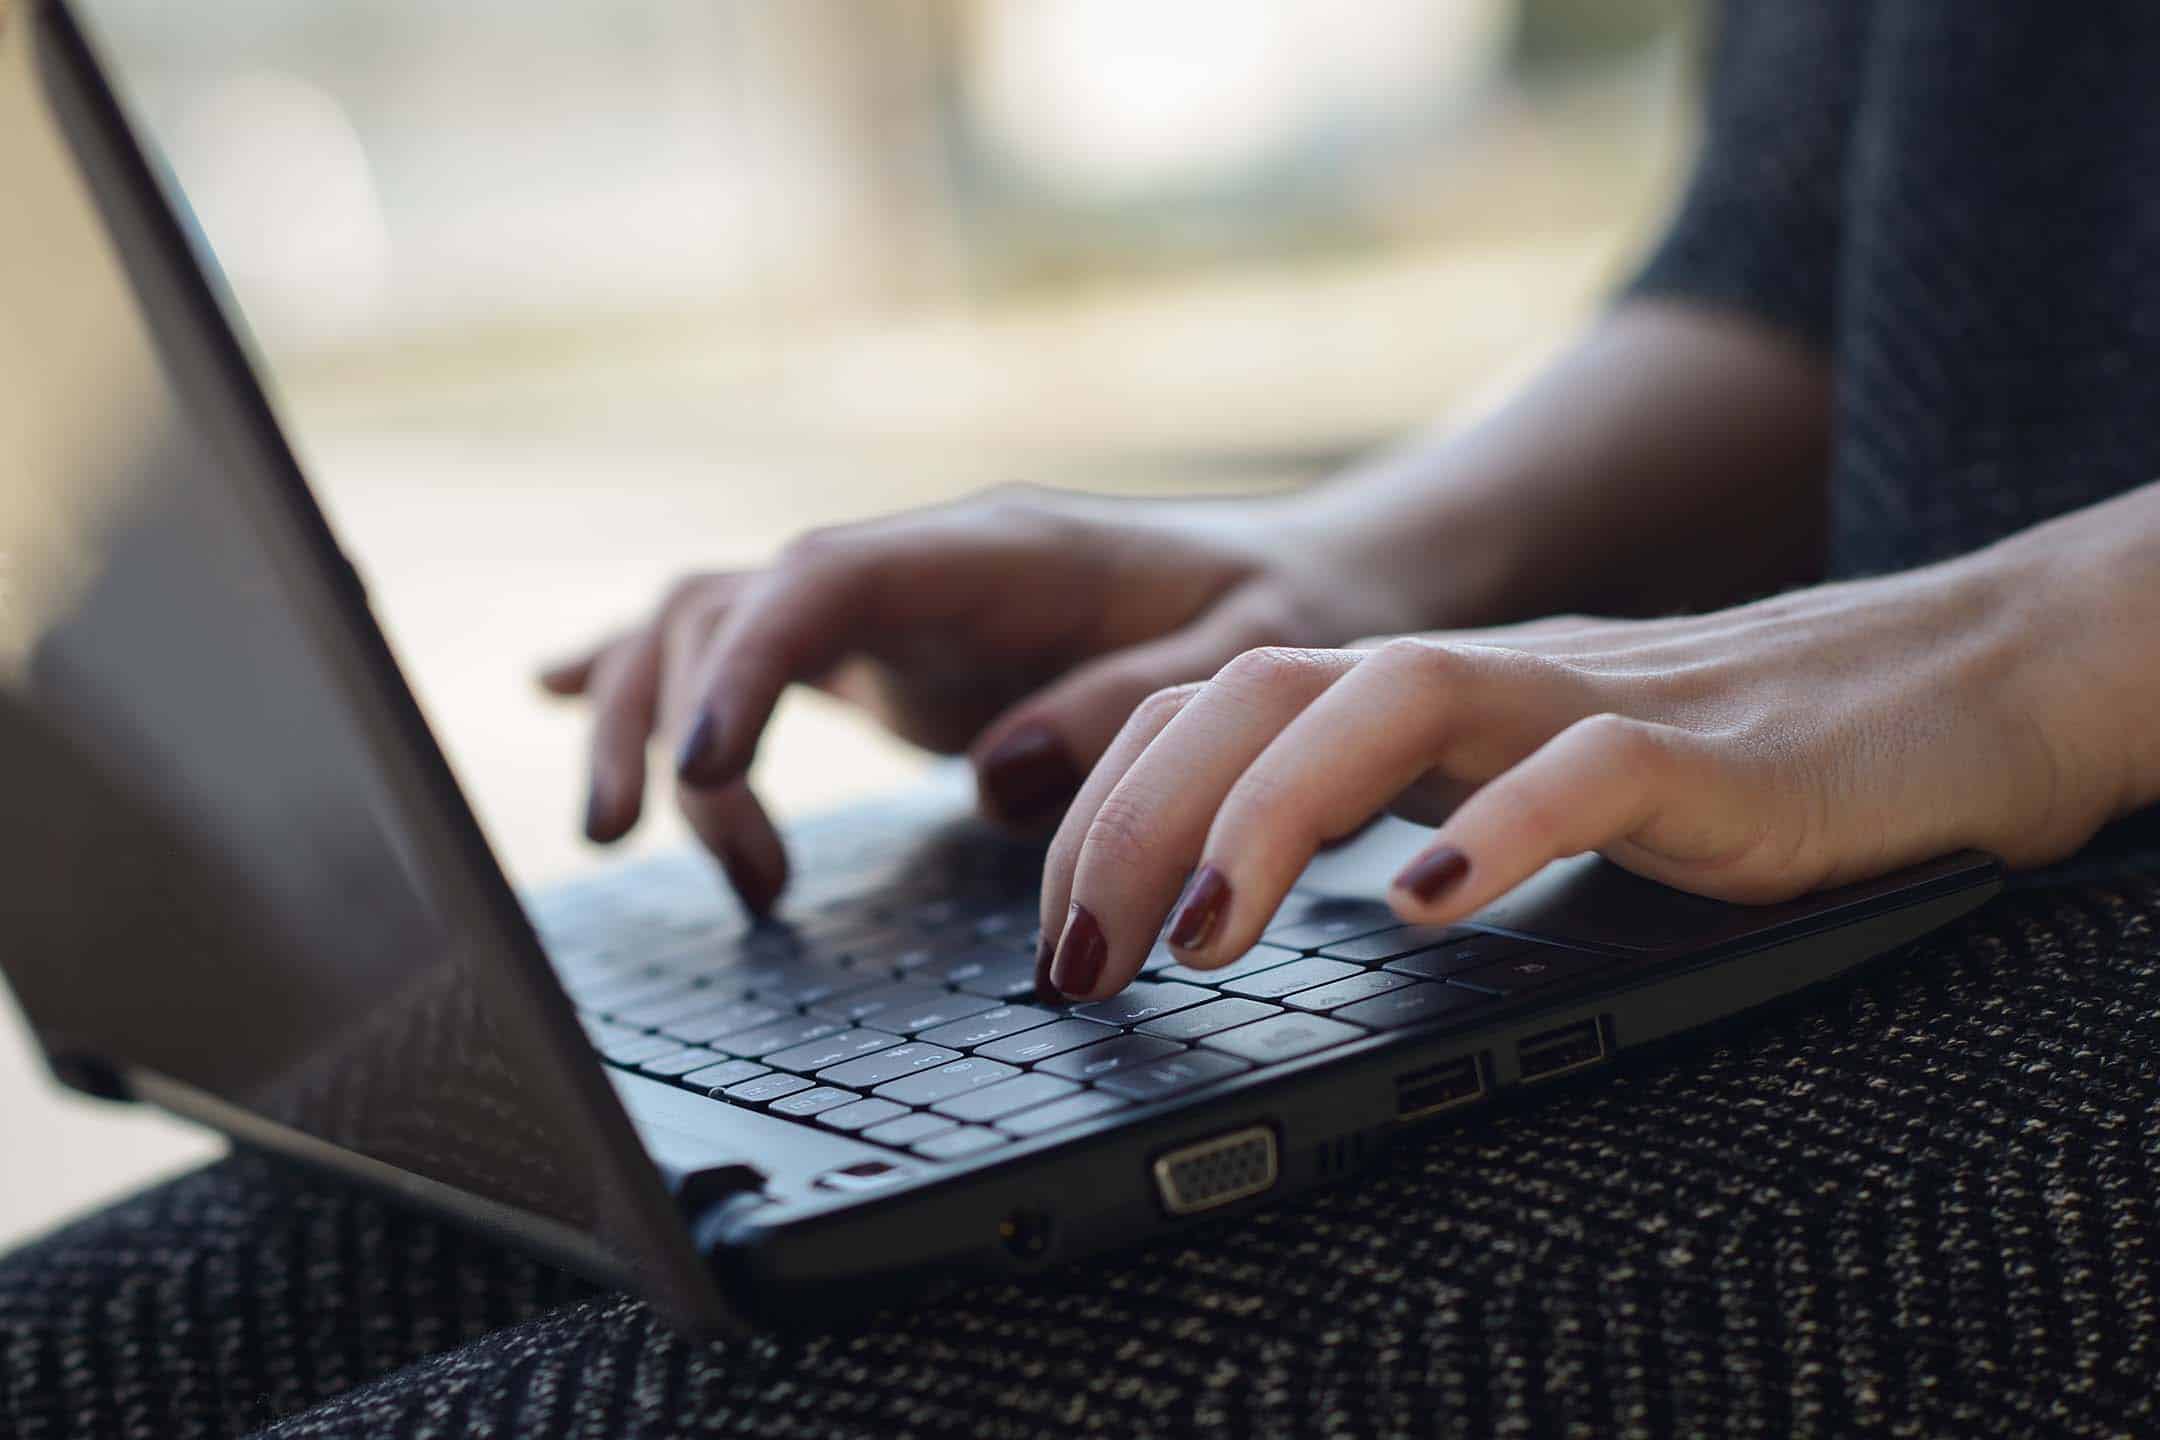 Woman's hands typing on a laptop